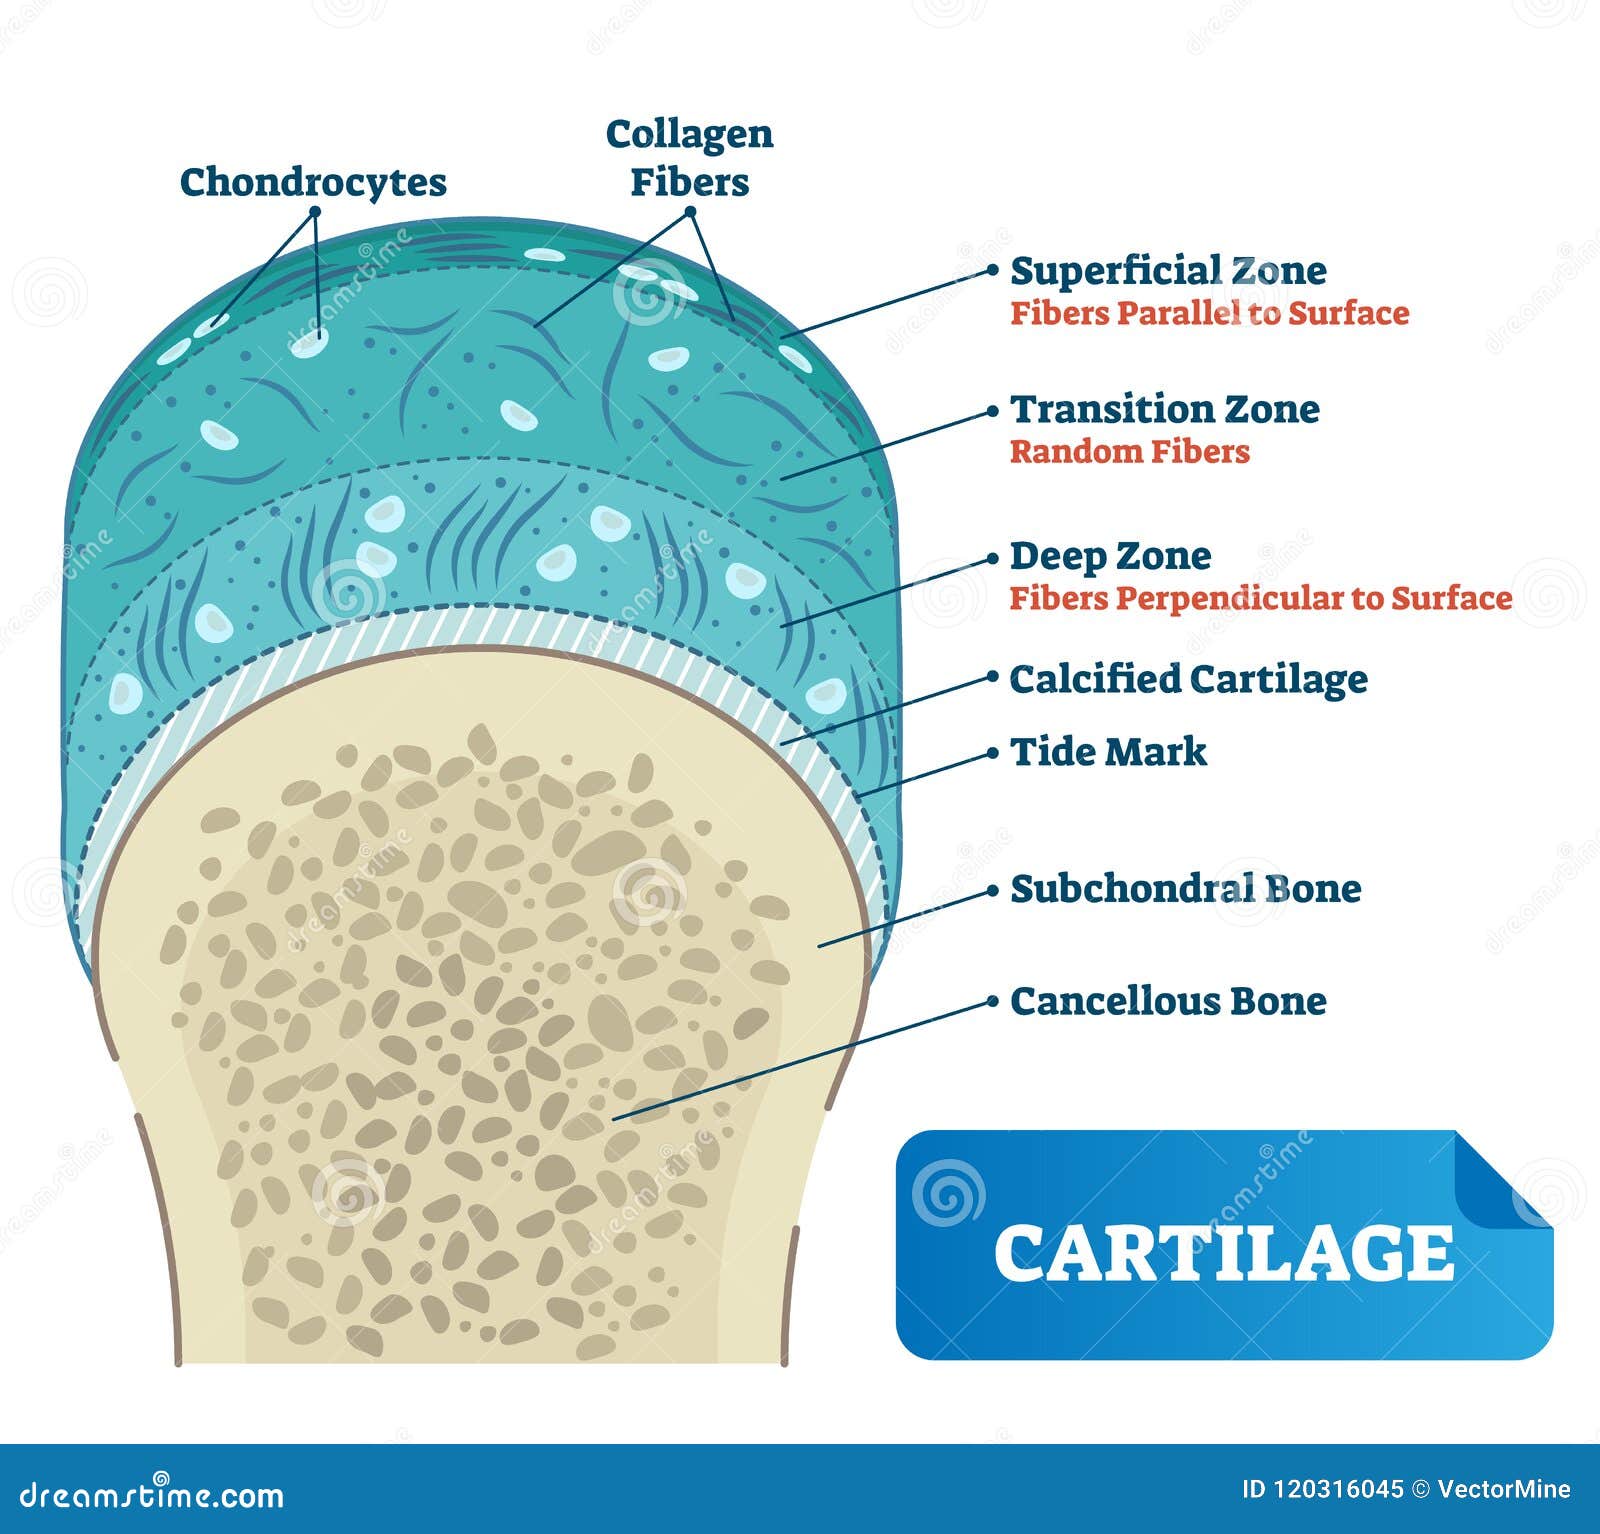 cartilage  . scheme of chondrocytes, collagen fibers, calcified, subchondral cancellous bone and superficial.